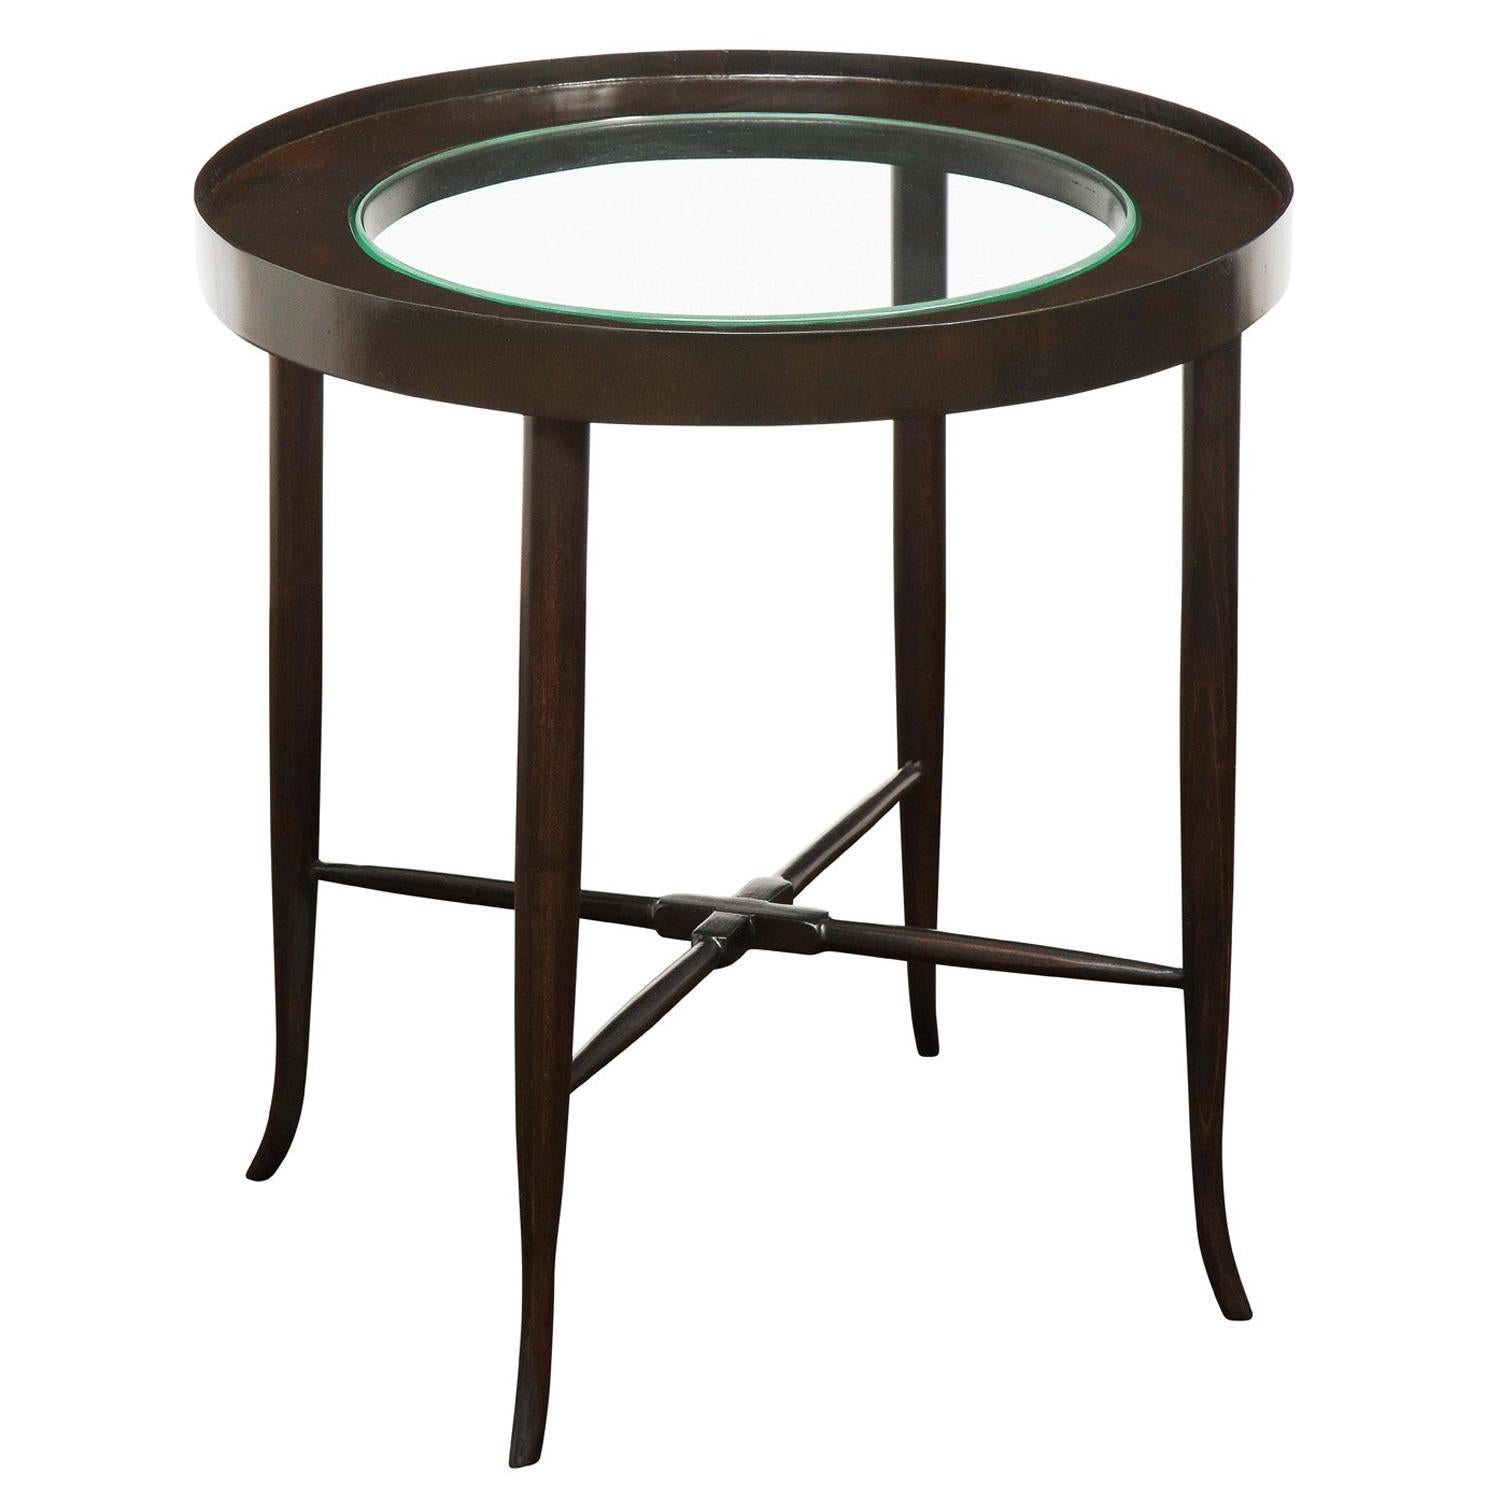 Tommi Parzinger Elegant Side Table with Inset Glass Top, 1950s